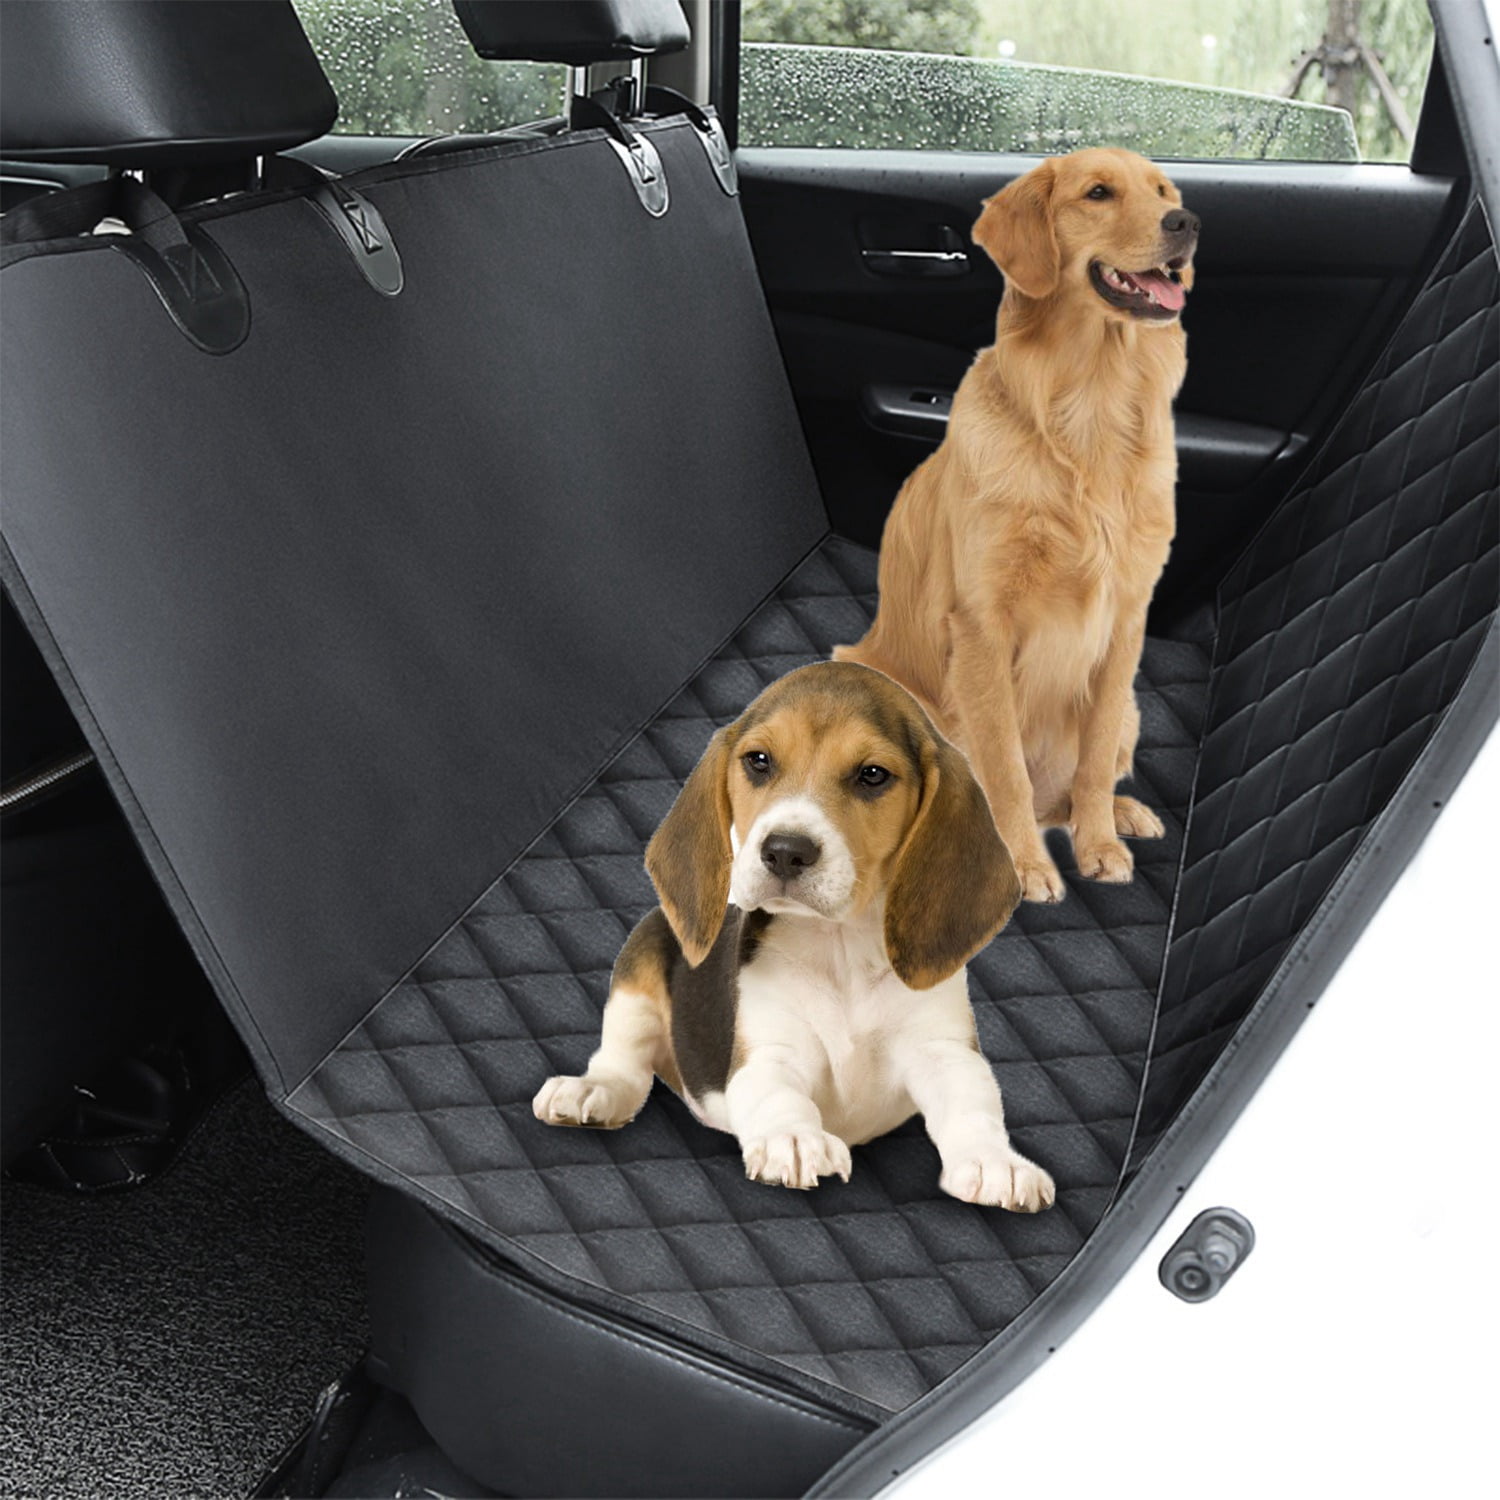 Nonslip Durable Pet Seat Protector for Cars SUVs Trucks Waterproof Scratchproof Dog Hammock with Mesh Window Side Flaps PettingPal Dog Car Seat Cover for Backseats with Car Net Pocket